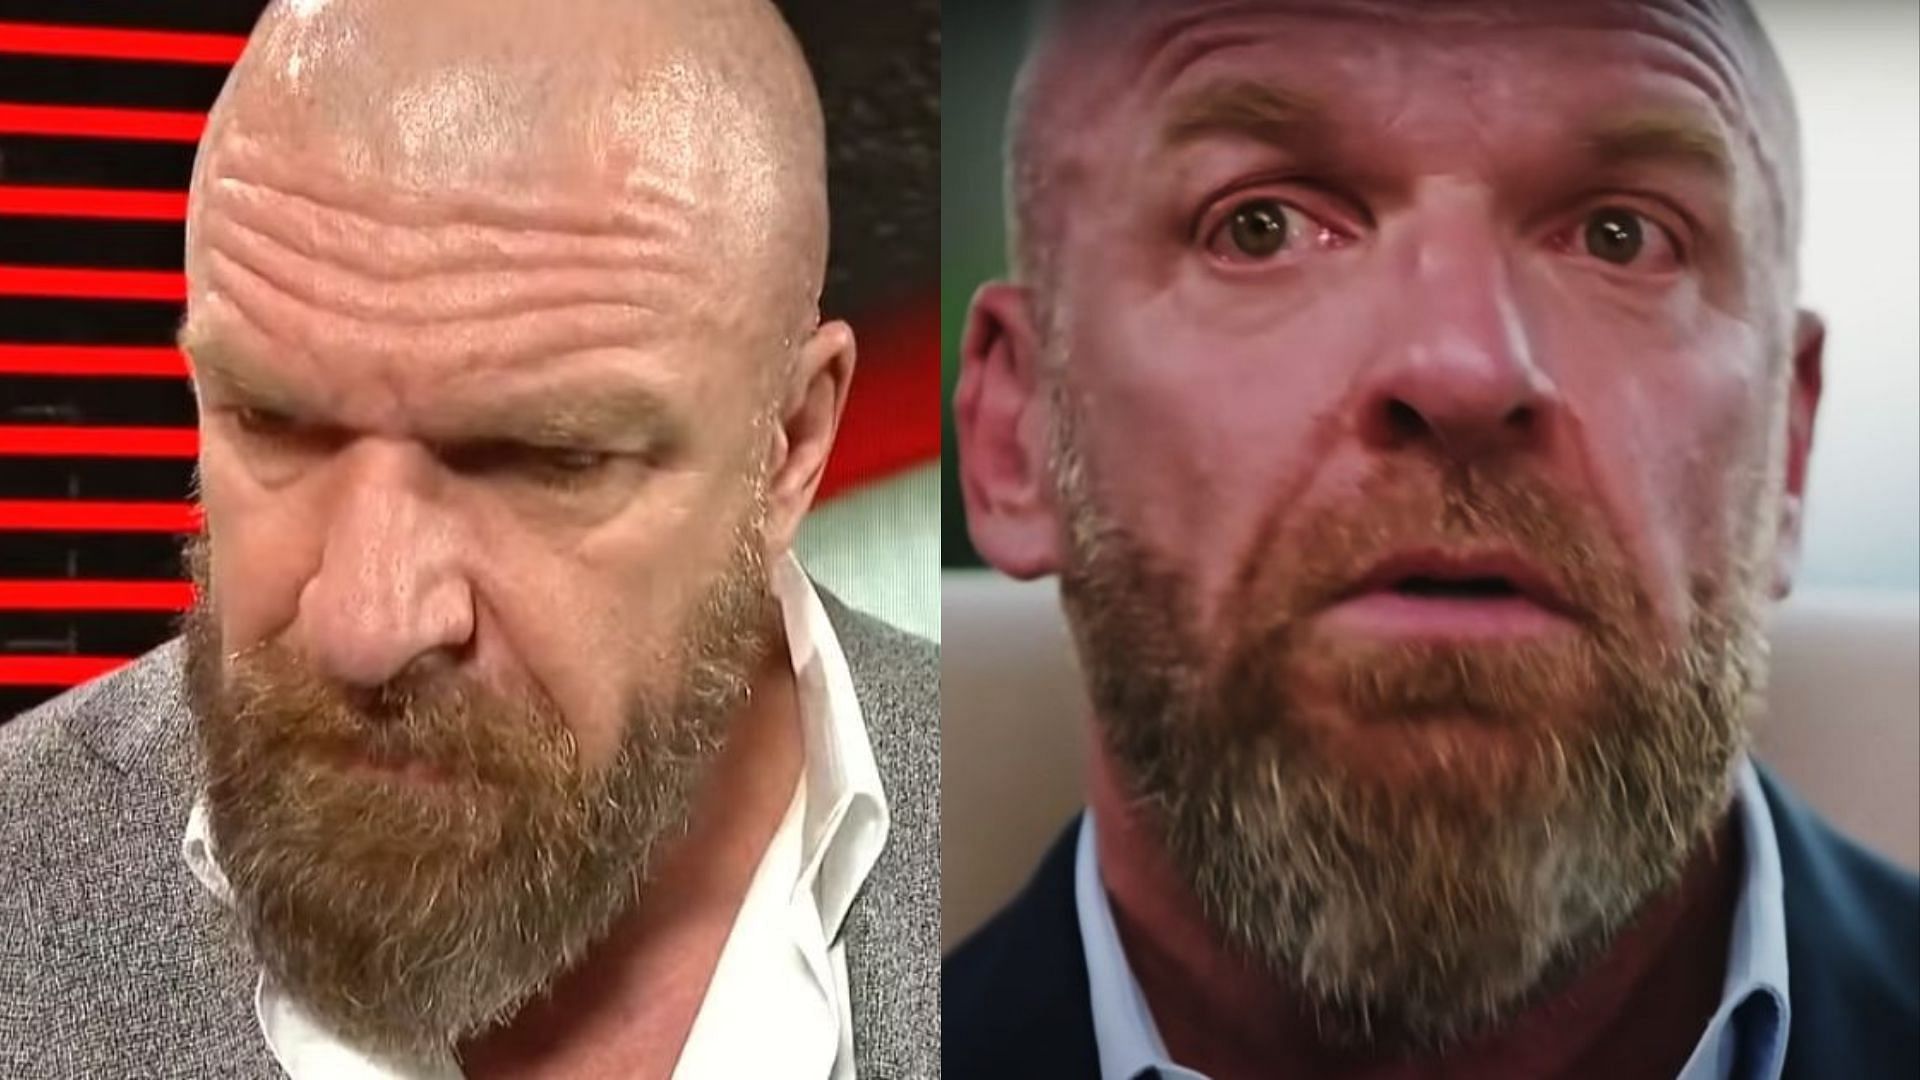 Triple H: WWE icon's insane transformation after his body